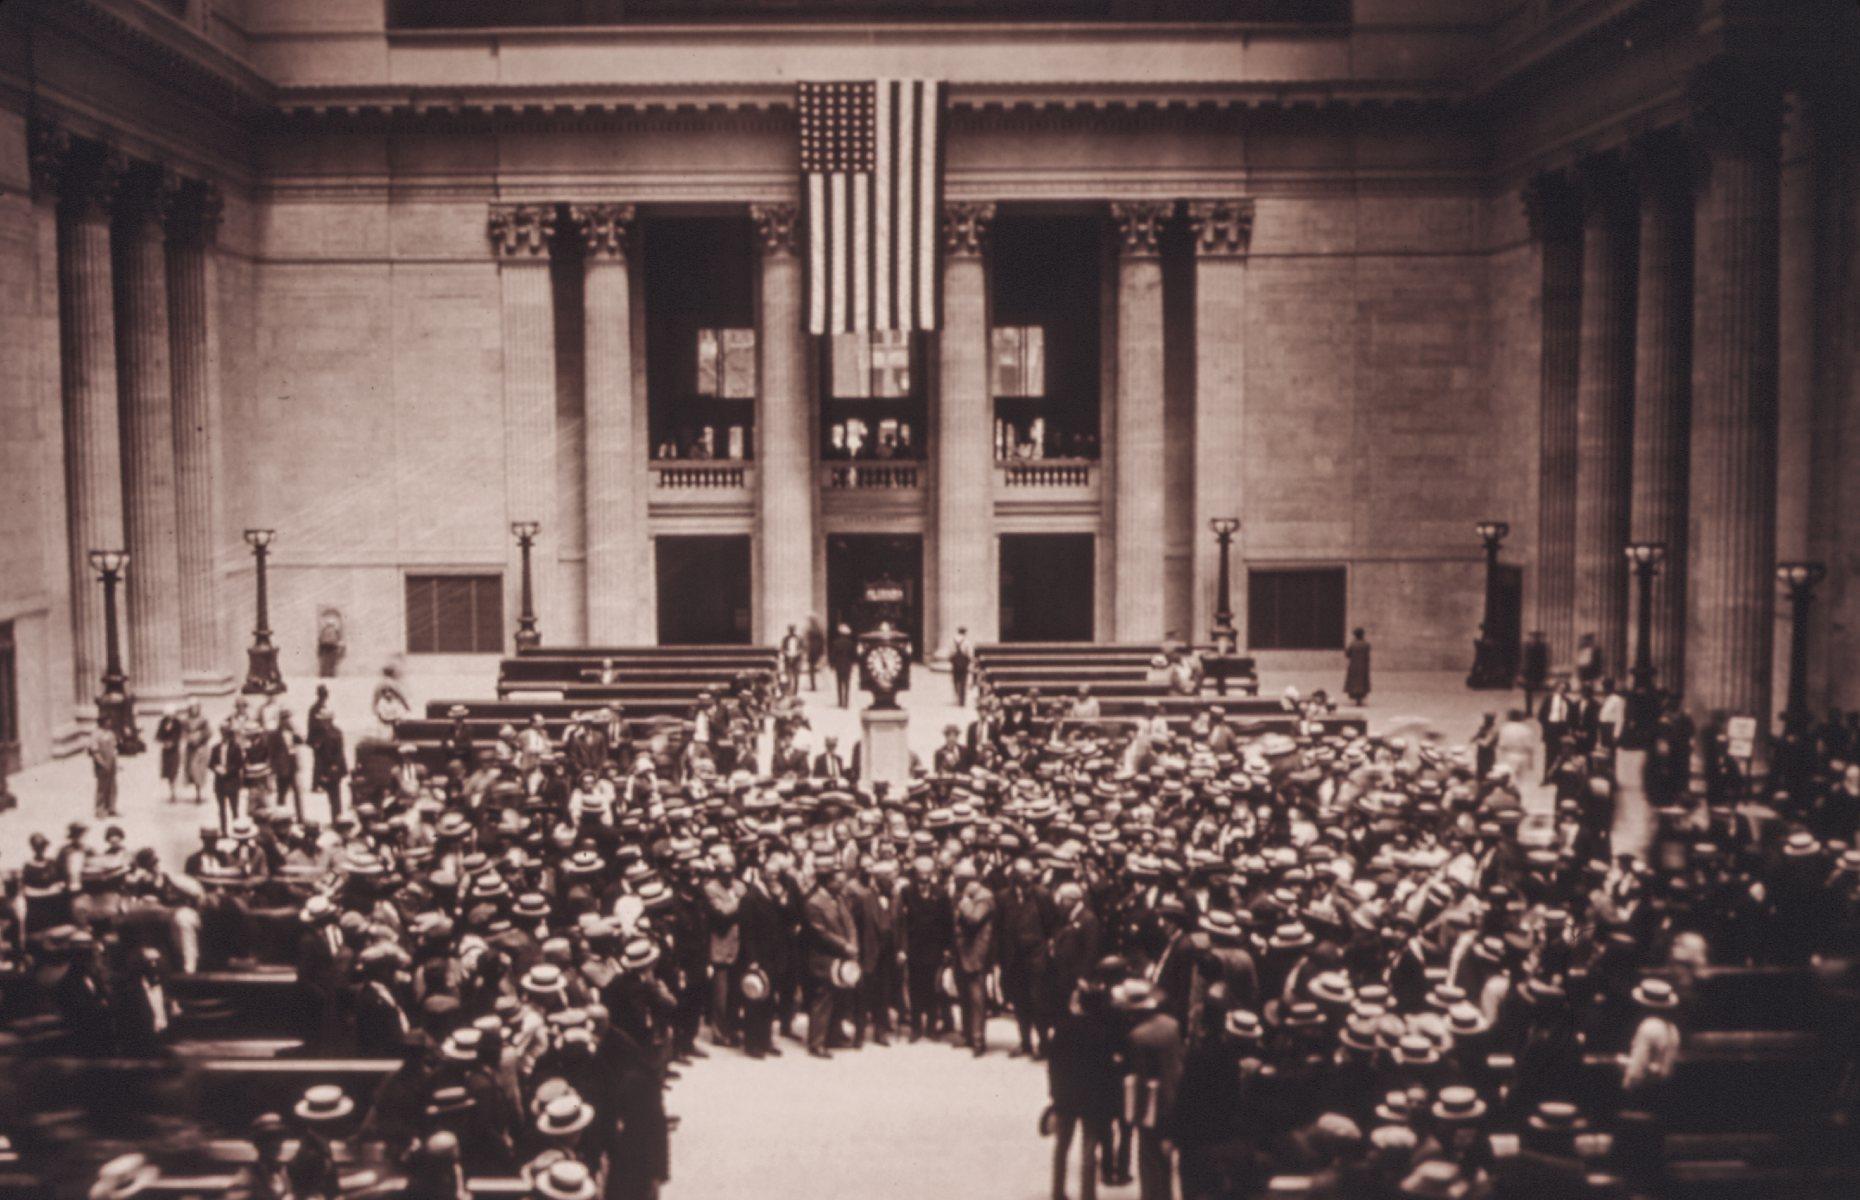 <p>Shown here at its dedication ceremony in 1925, Chicago’s Union Station has served America’s rail travelers for almost a century. Designed by Daniel Burnham – the architect behind the iconic Flatiron Building in New York and many more landmarks in the Windy City – it took 10 years and a cool $75 million ($1bn today) to complete. It is now one of Amtrak’s busiest stations, as since 1972 all the operator’s Chicago services have departed from and terminated at Union Station.</p>